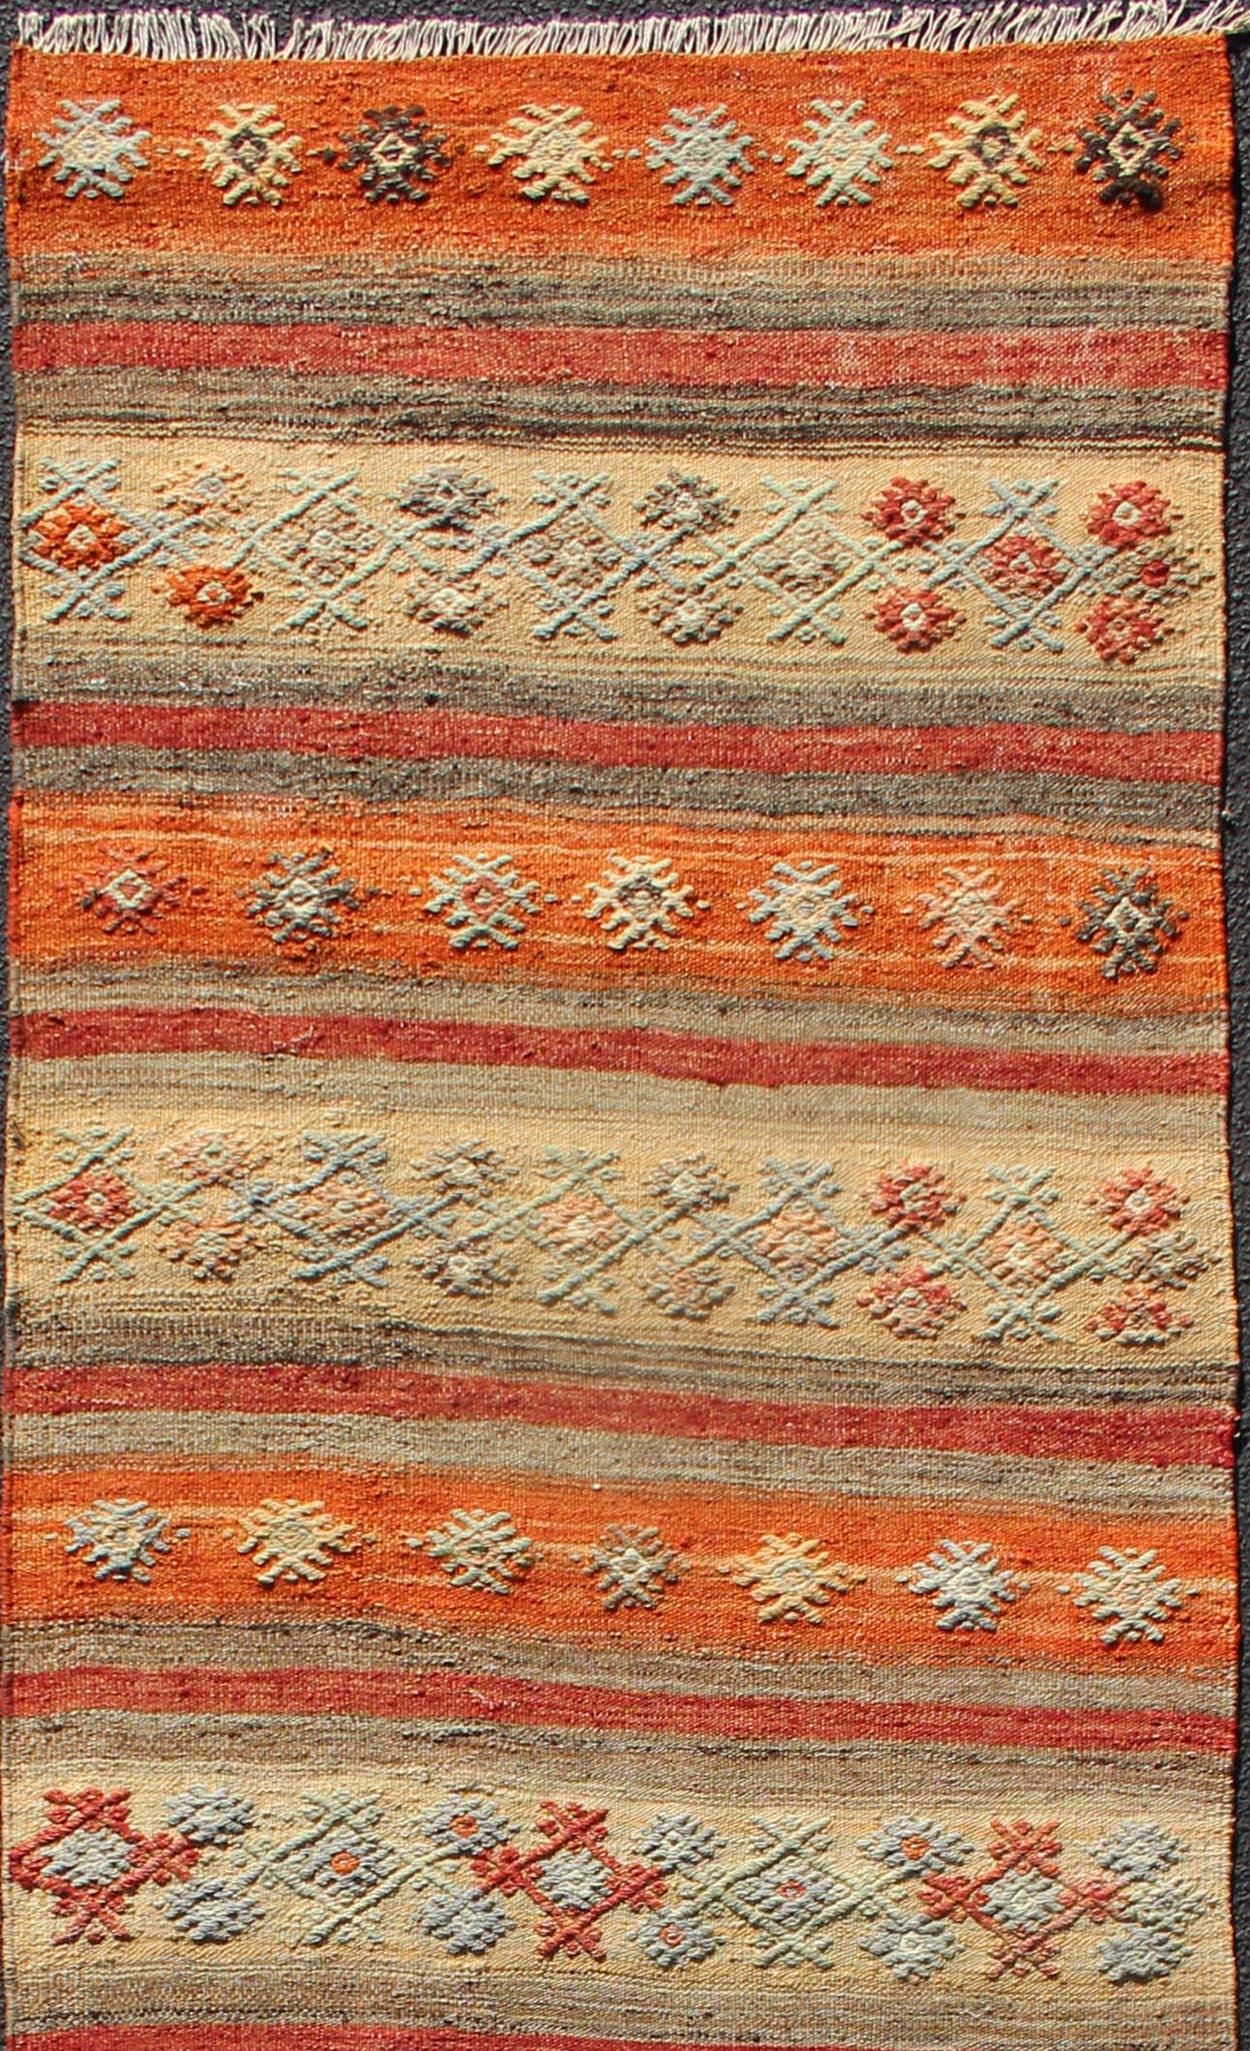 Vintage Turkish Kilim runner with horizontal stripes and scattered geometric shapes in embroideries, rug ned-124, country of origin / type : Turquie / Kilim, vers le milieu du 20ème siècle

Ce Kilim unique du milieu du siècle présente des formes